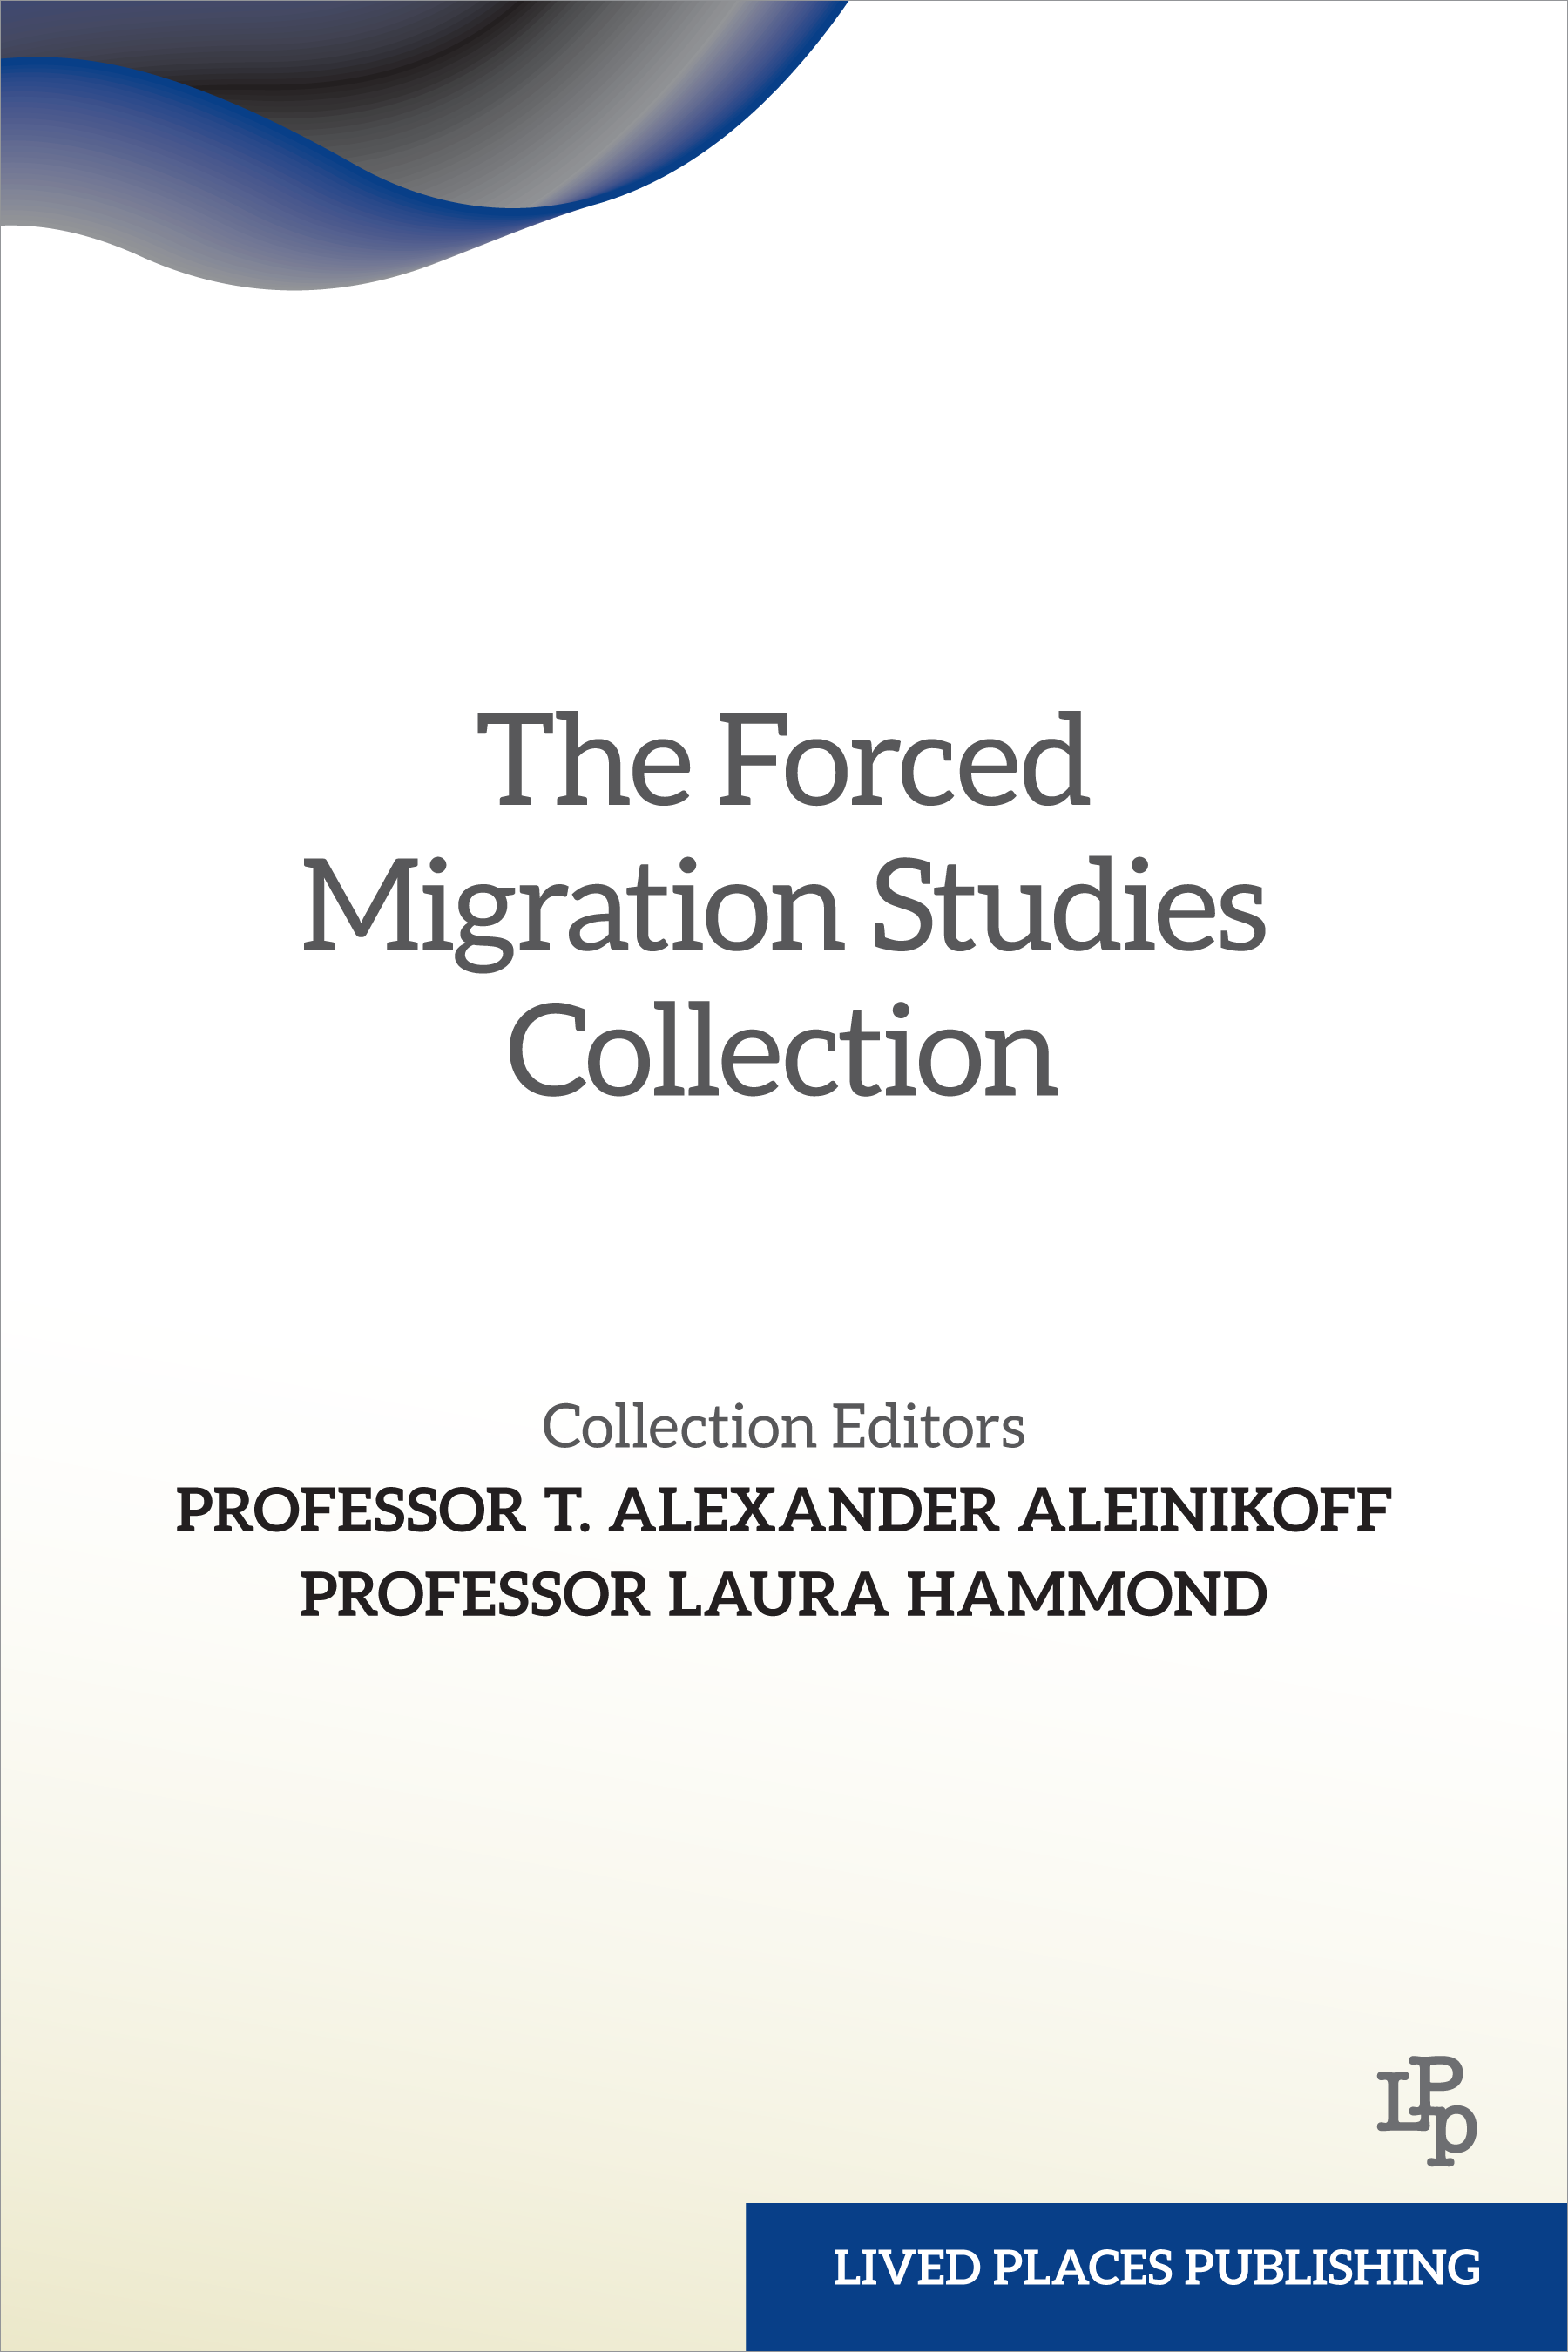 The Forced Migration Studies Collection. Collection editors: Professor T. Alex Aleinikoff and Professor Laura Hammond. 